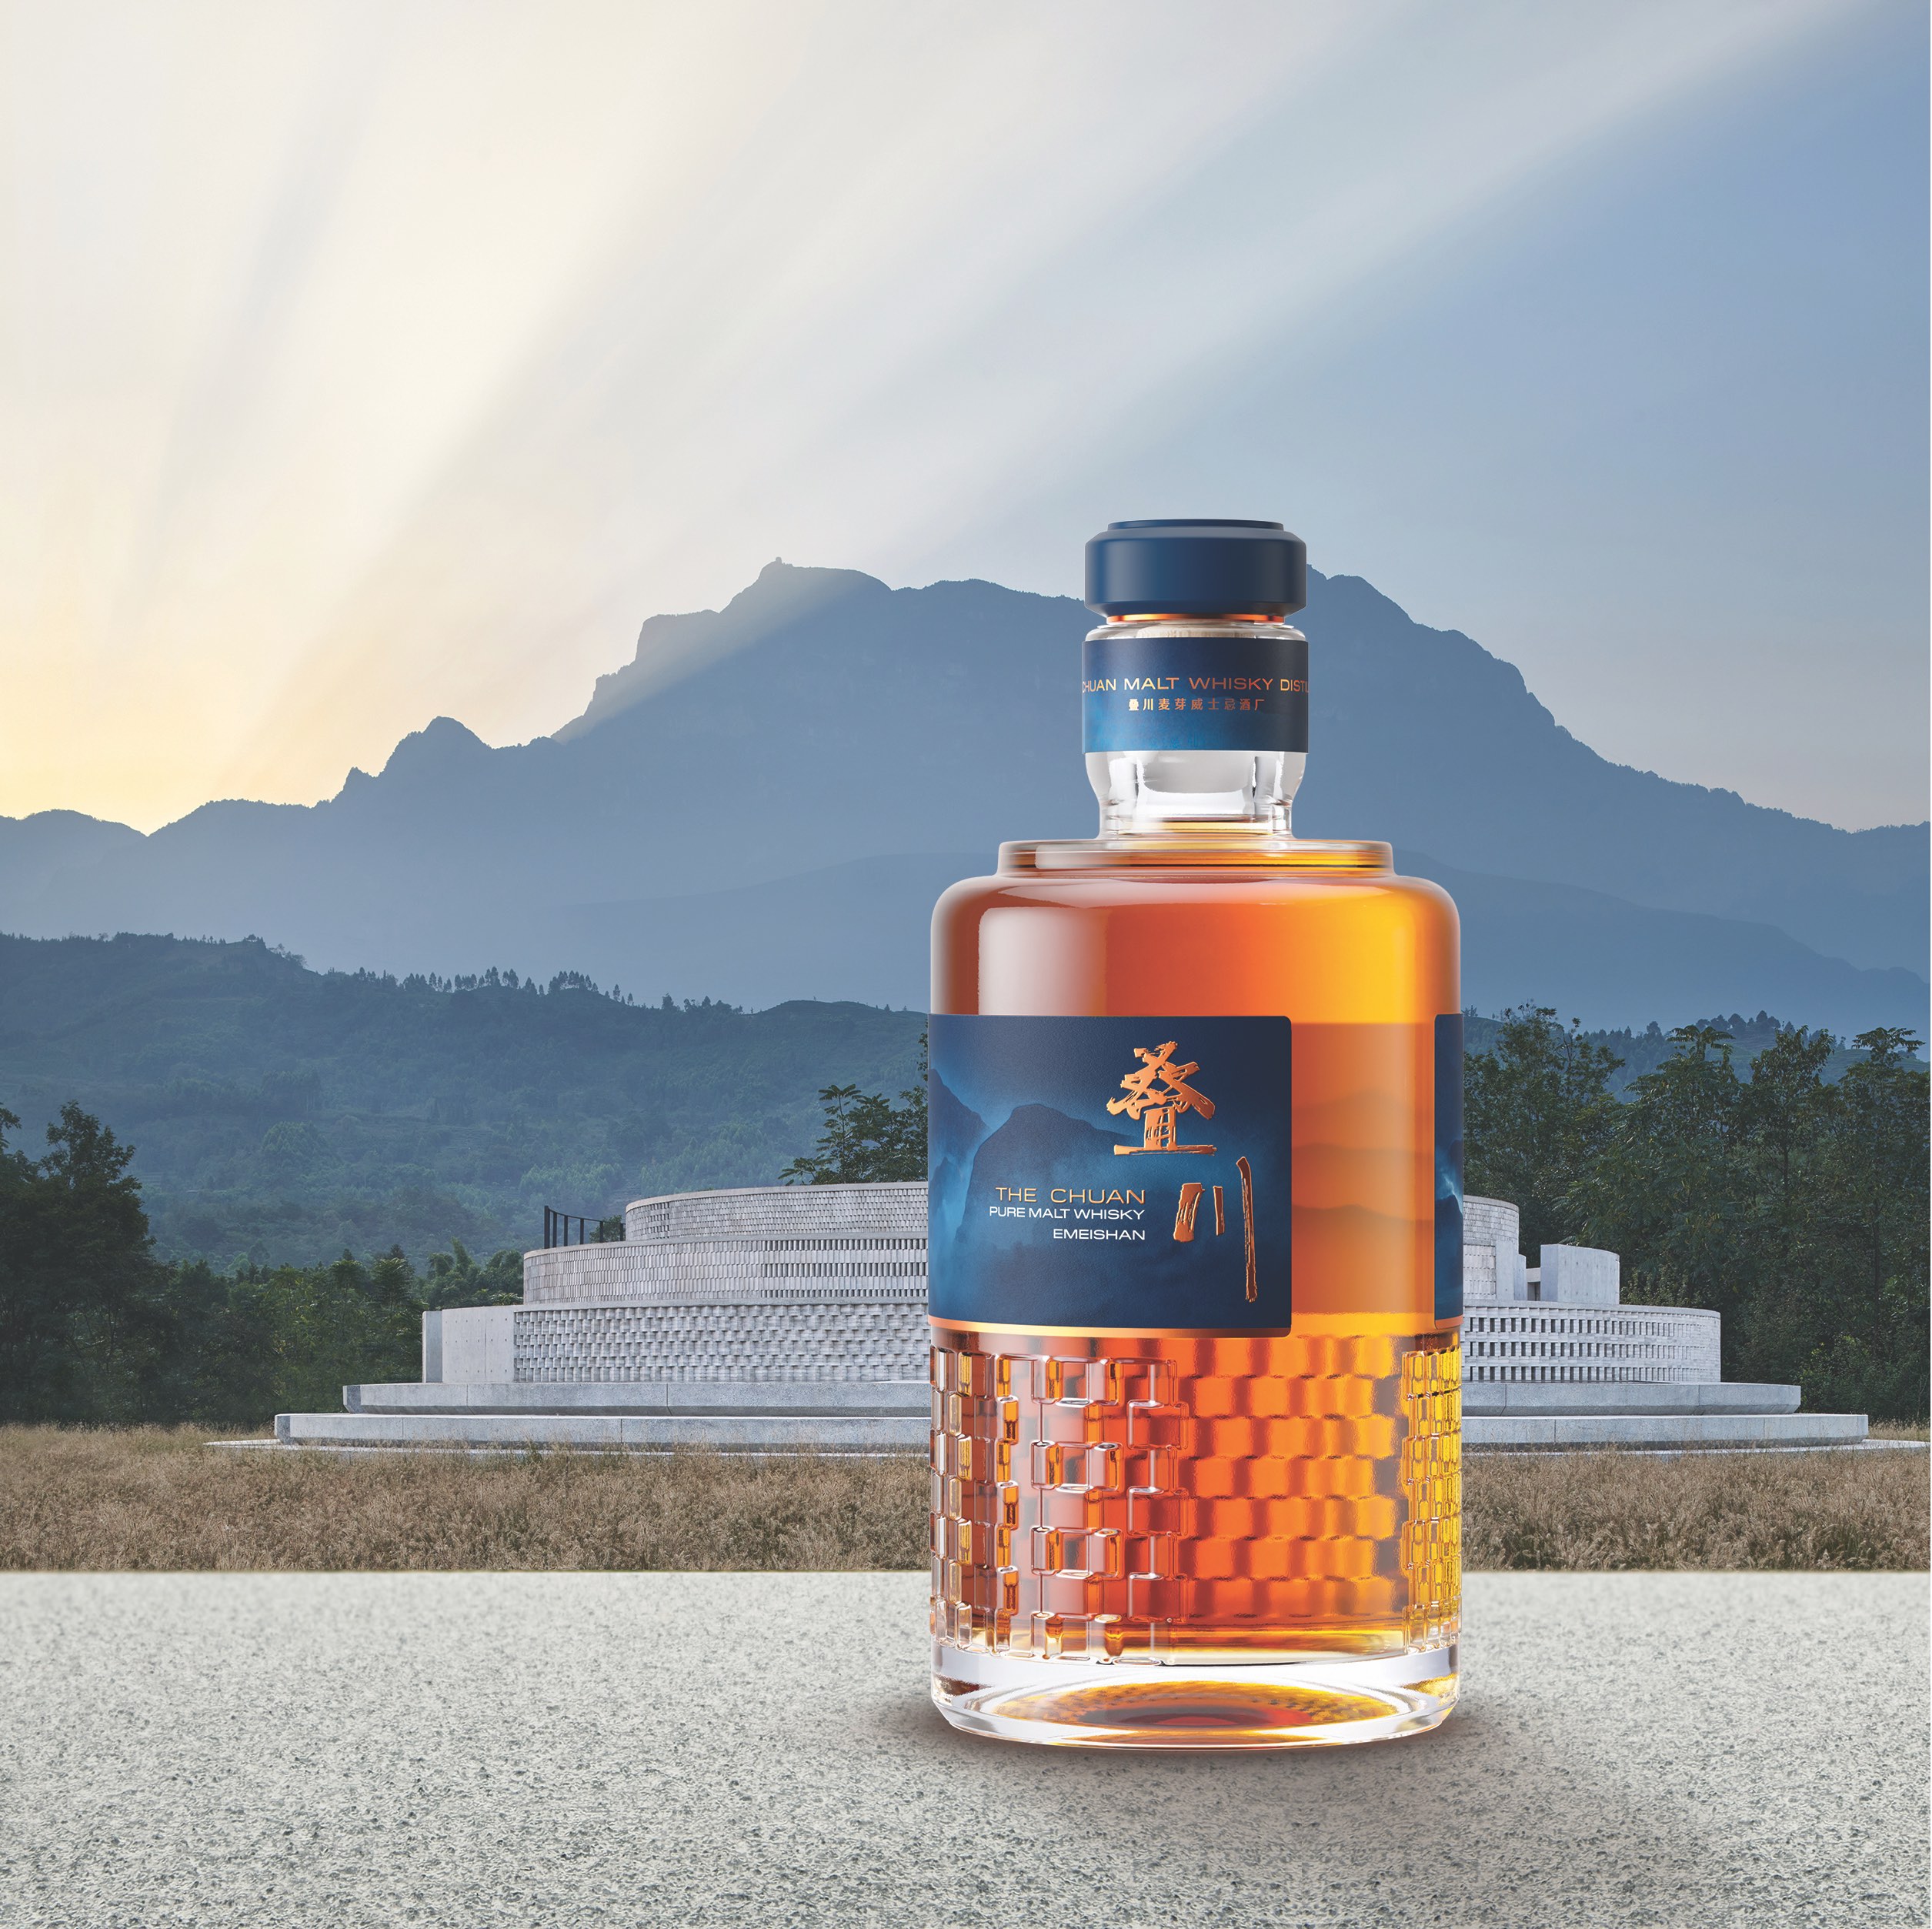 Pernod Ricard Unveils Packaging Design for China's First Prestige Malt Whisky, The Chuan